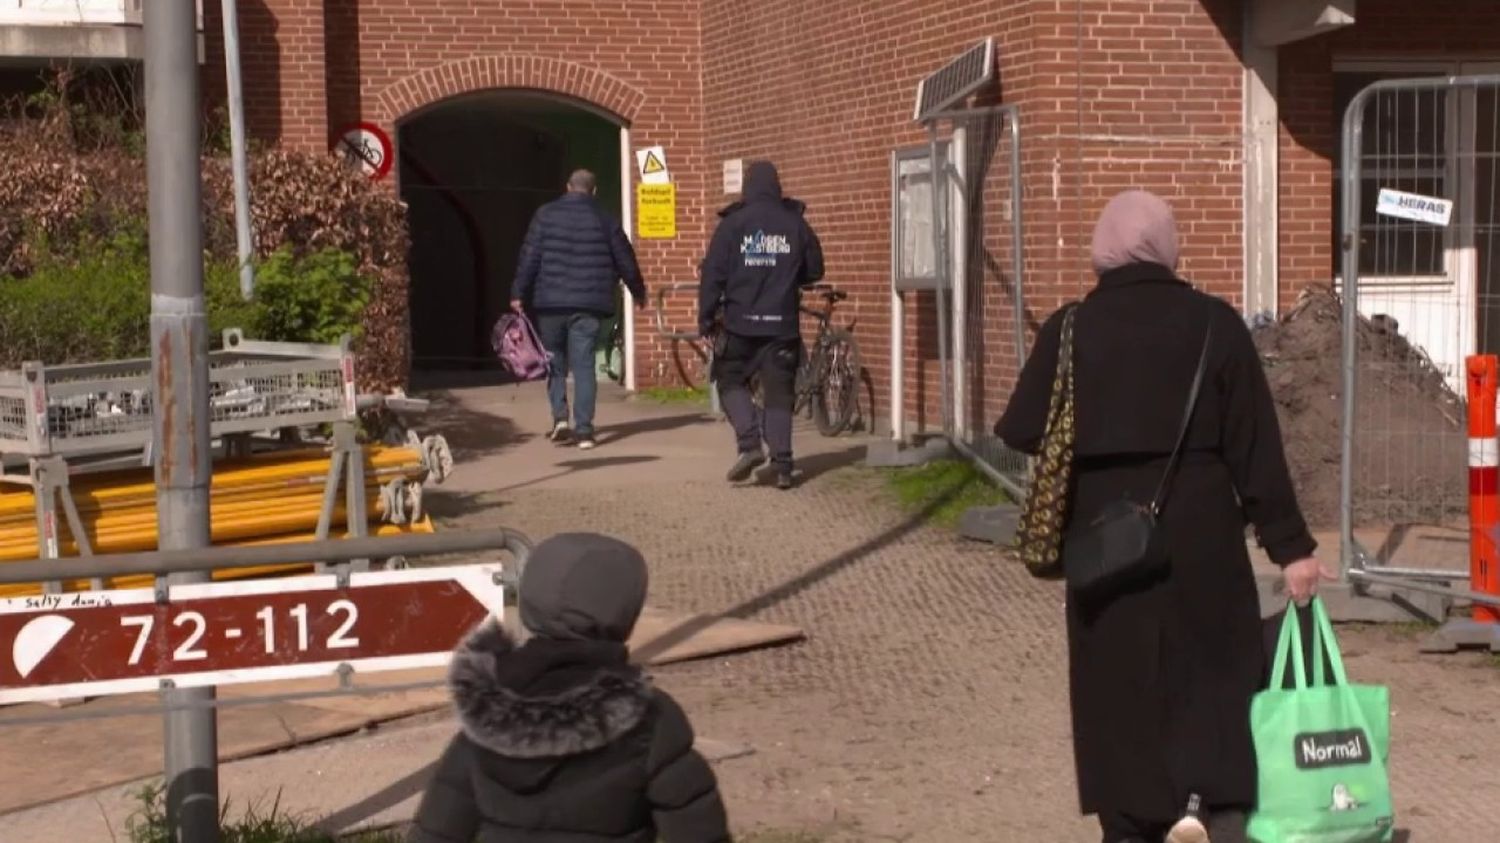 Denmark: a tough policy to fight against immigration
